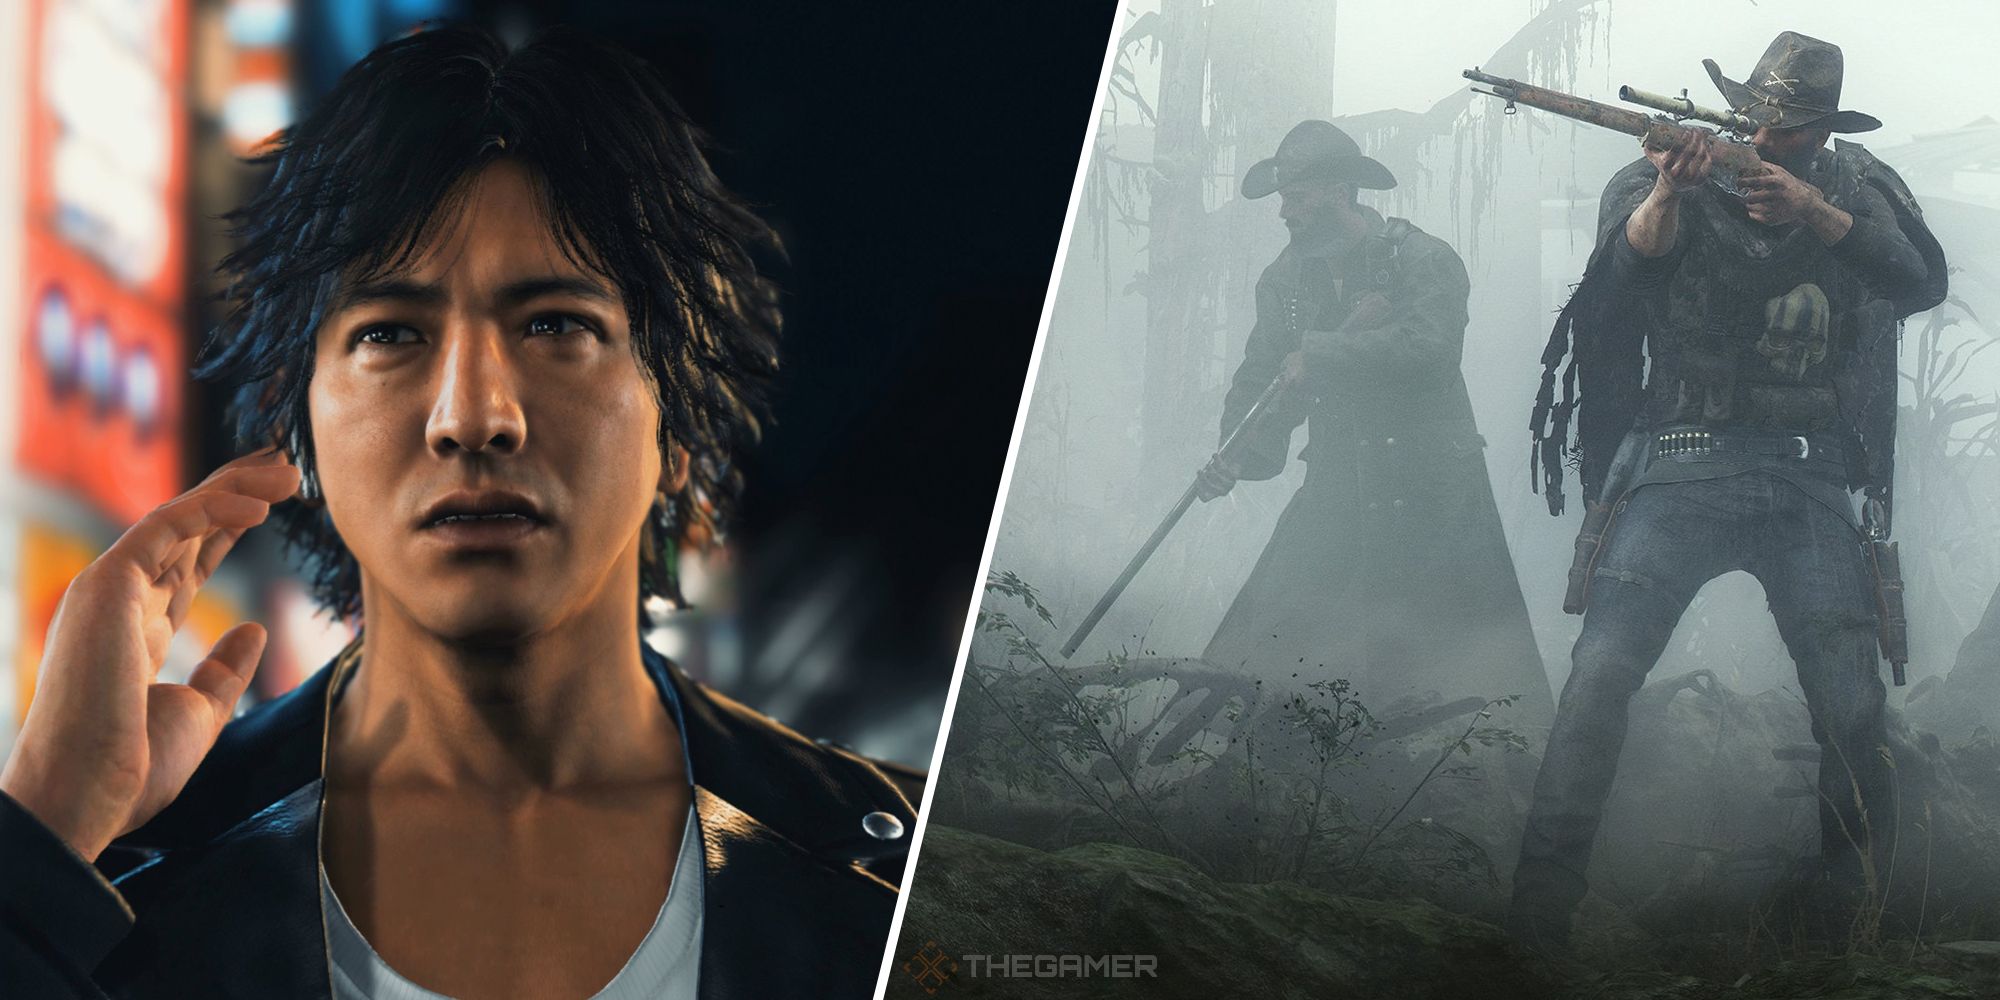 Yagami from Judgment on the left, two hunters from Hunt: Showdown on the right